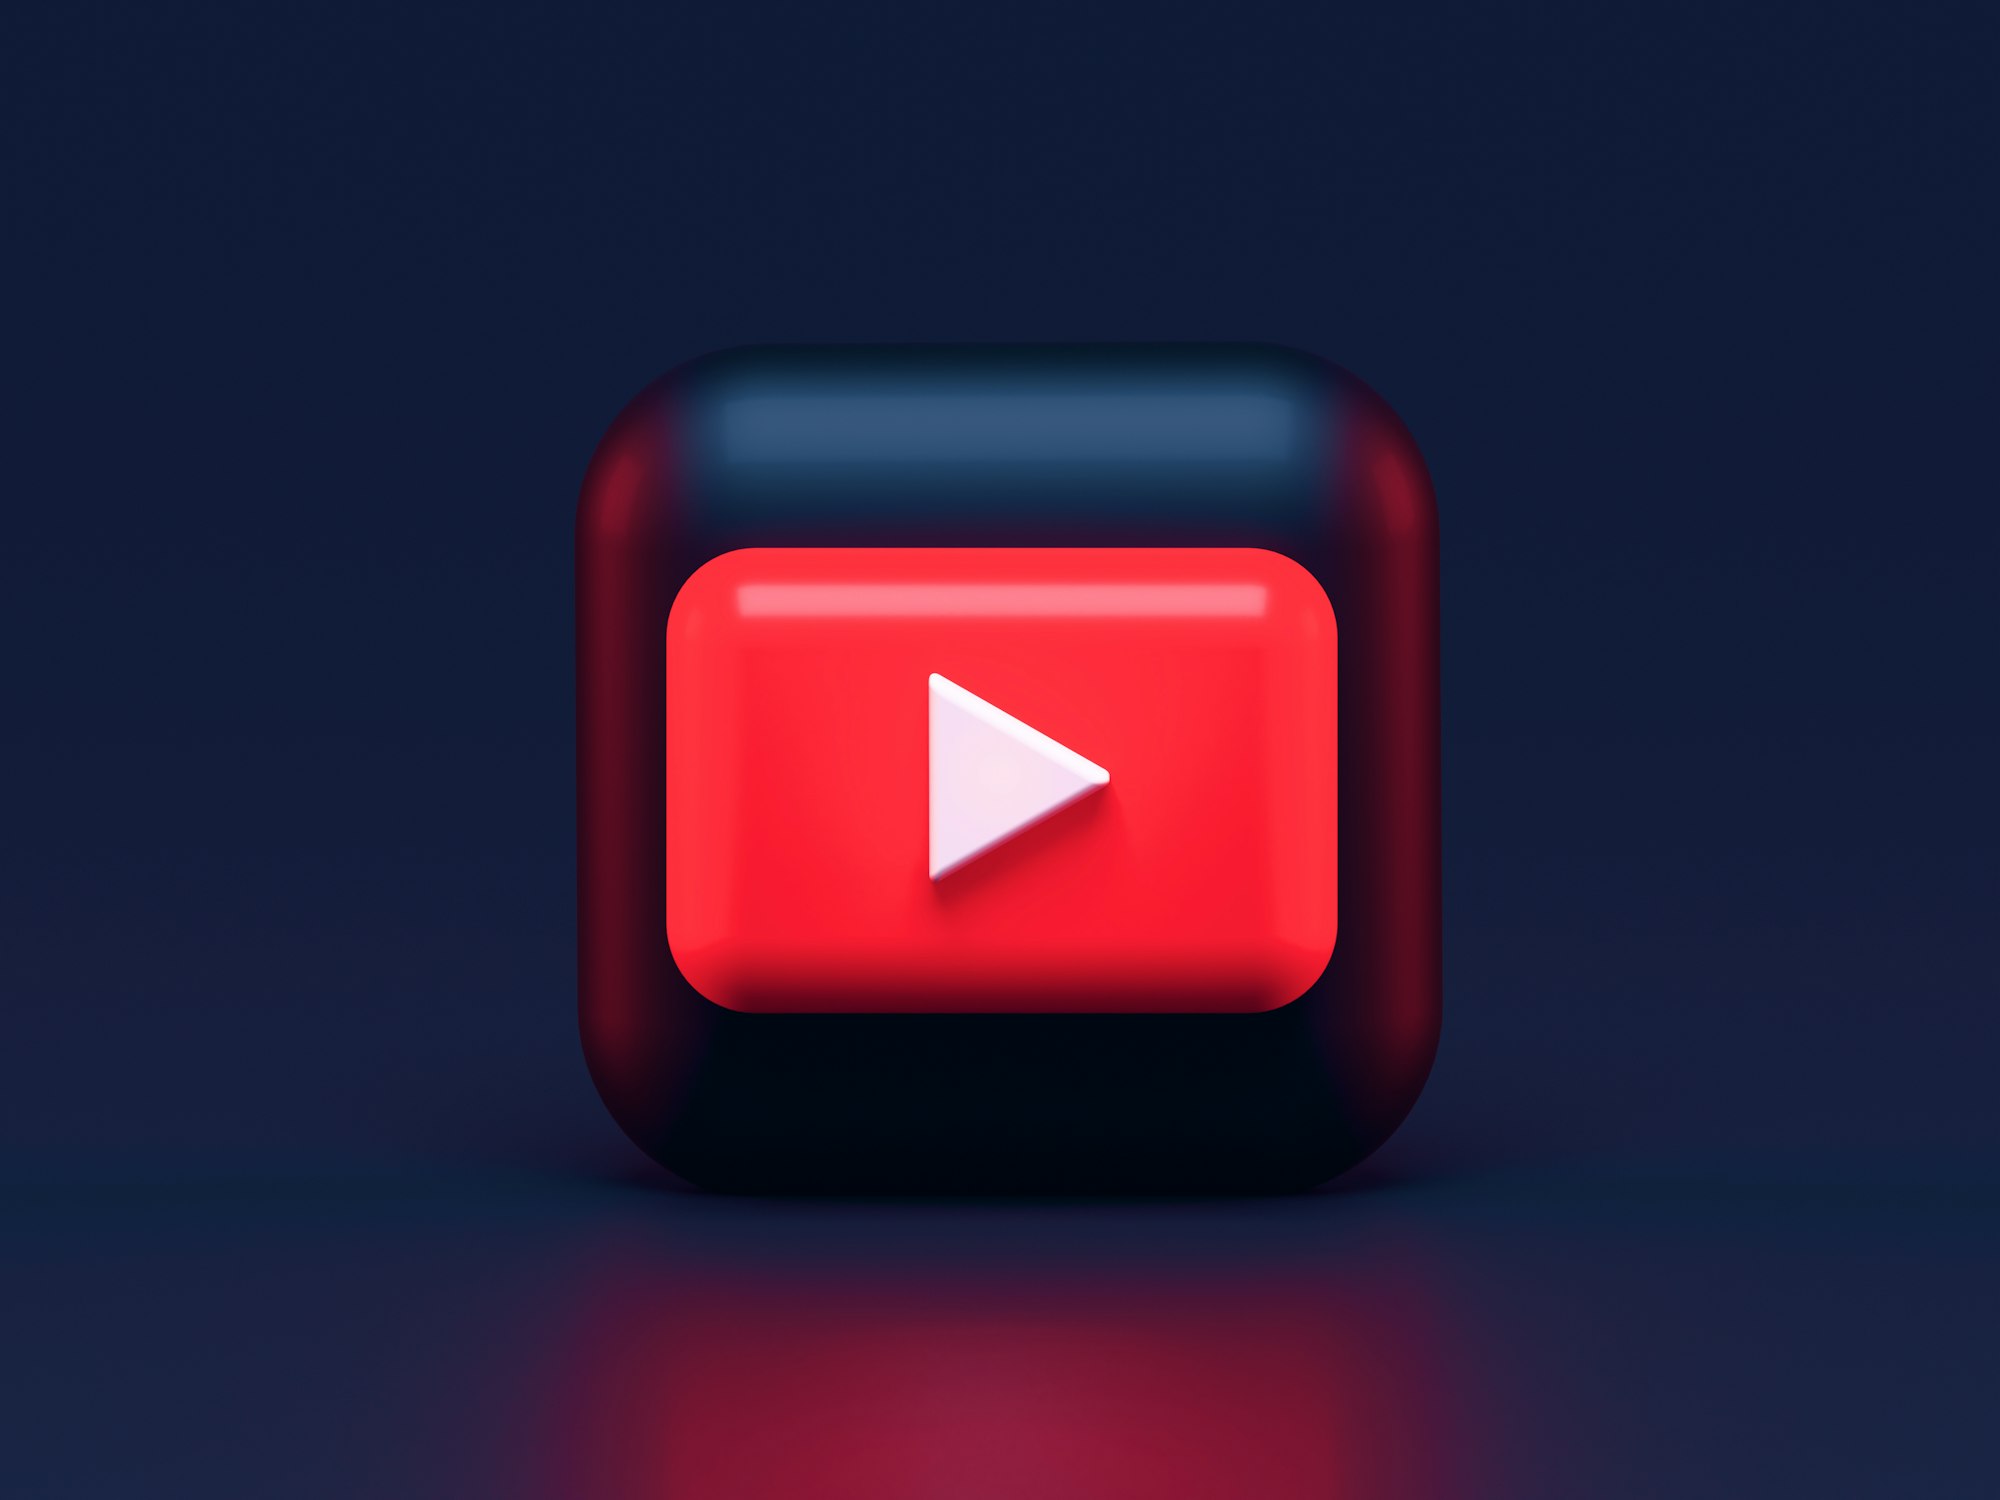 The New YouTube Monetization Models and Policy Change